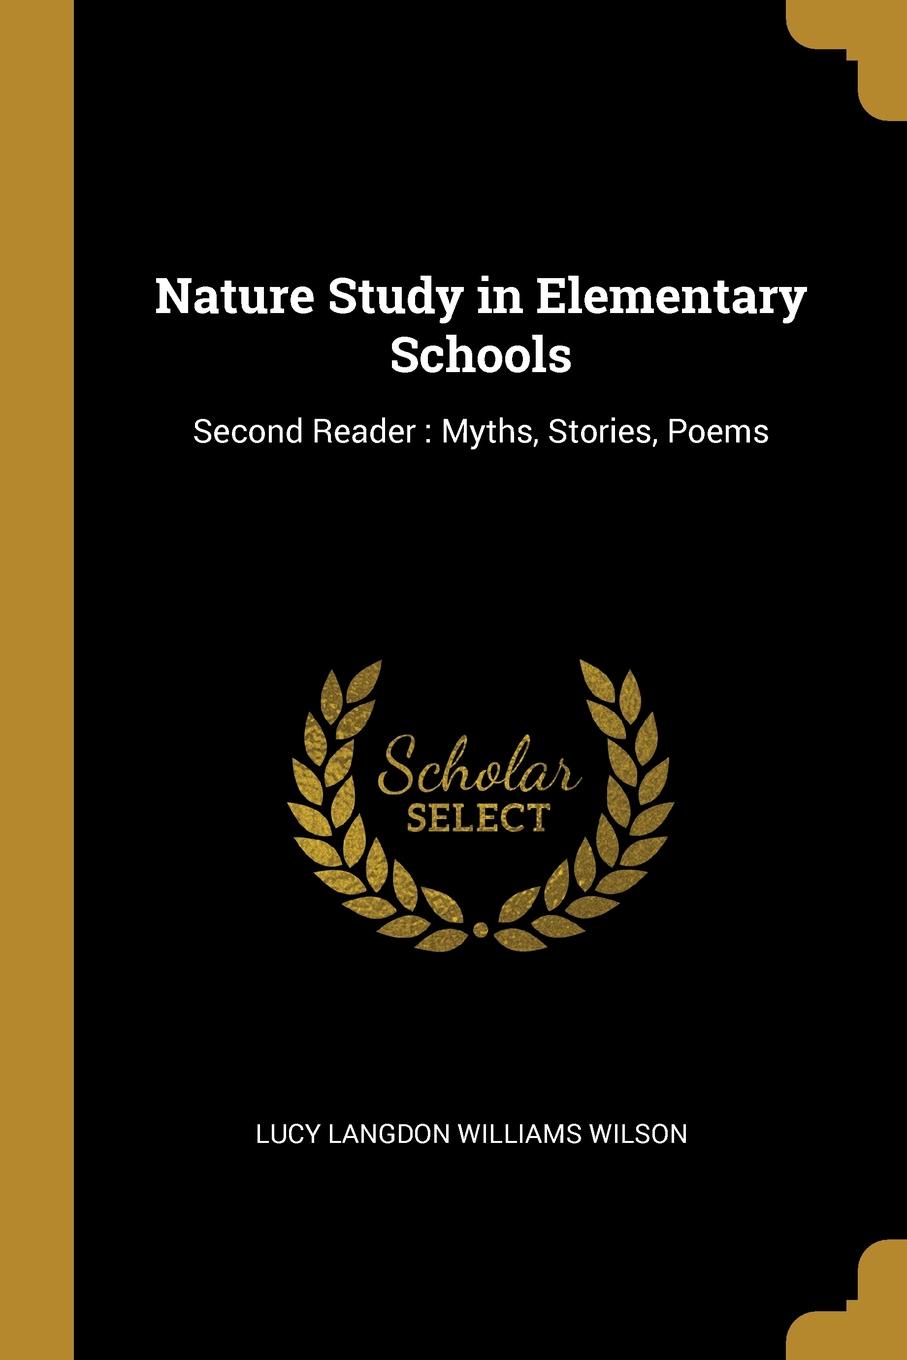 Nature Study in Elementary Schools. Second Reader : Myths, Stories, Poems